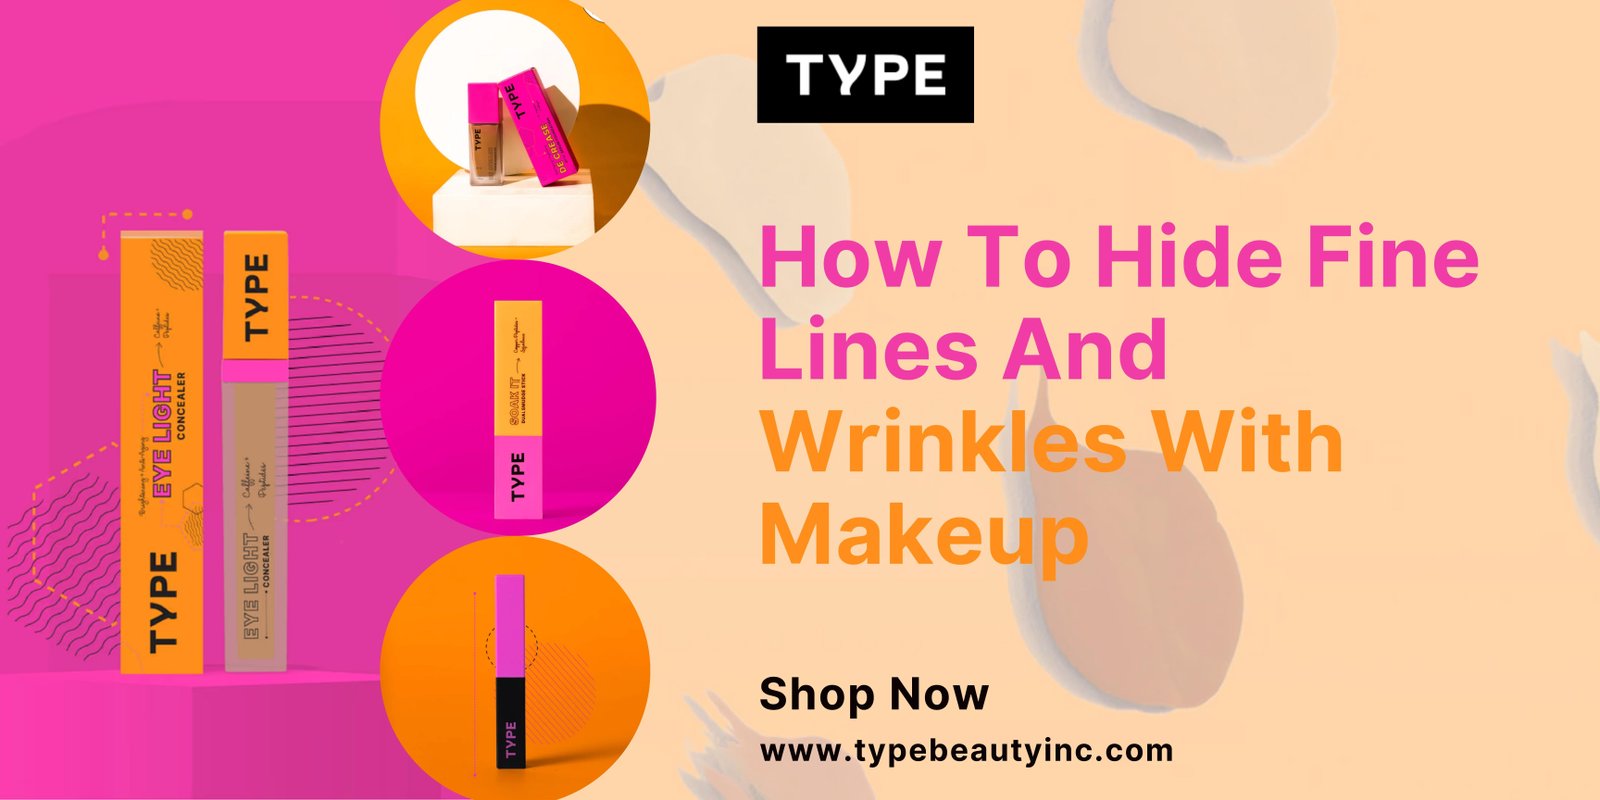 How To Hide Fine Lines And Wrinkles With Makeup